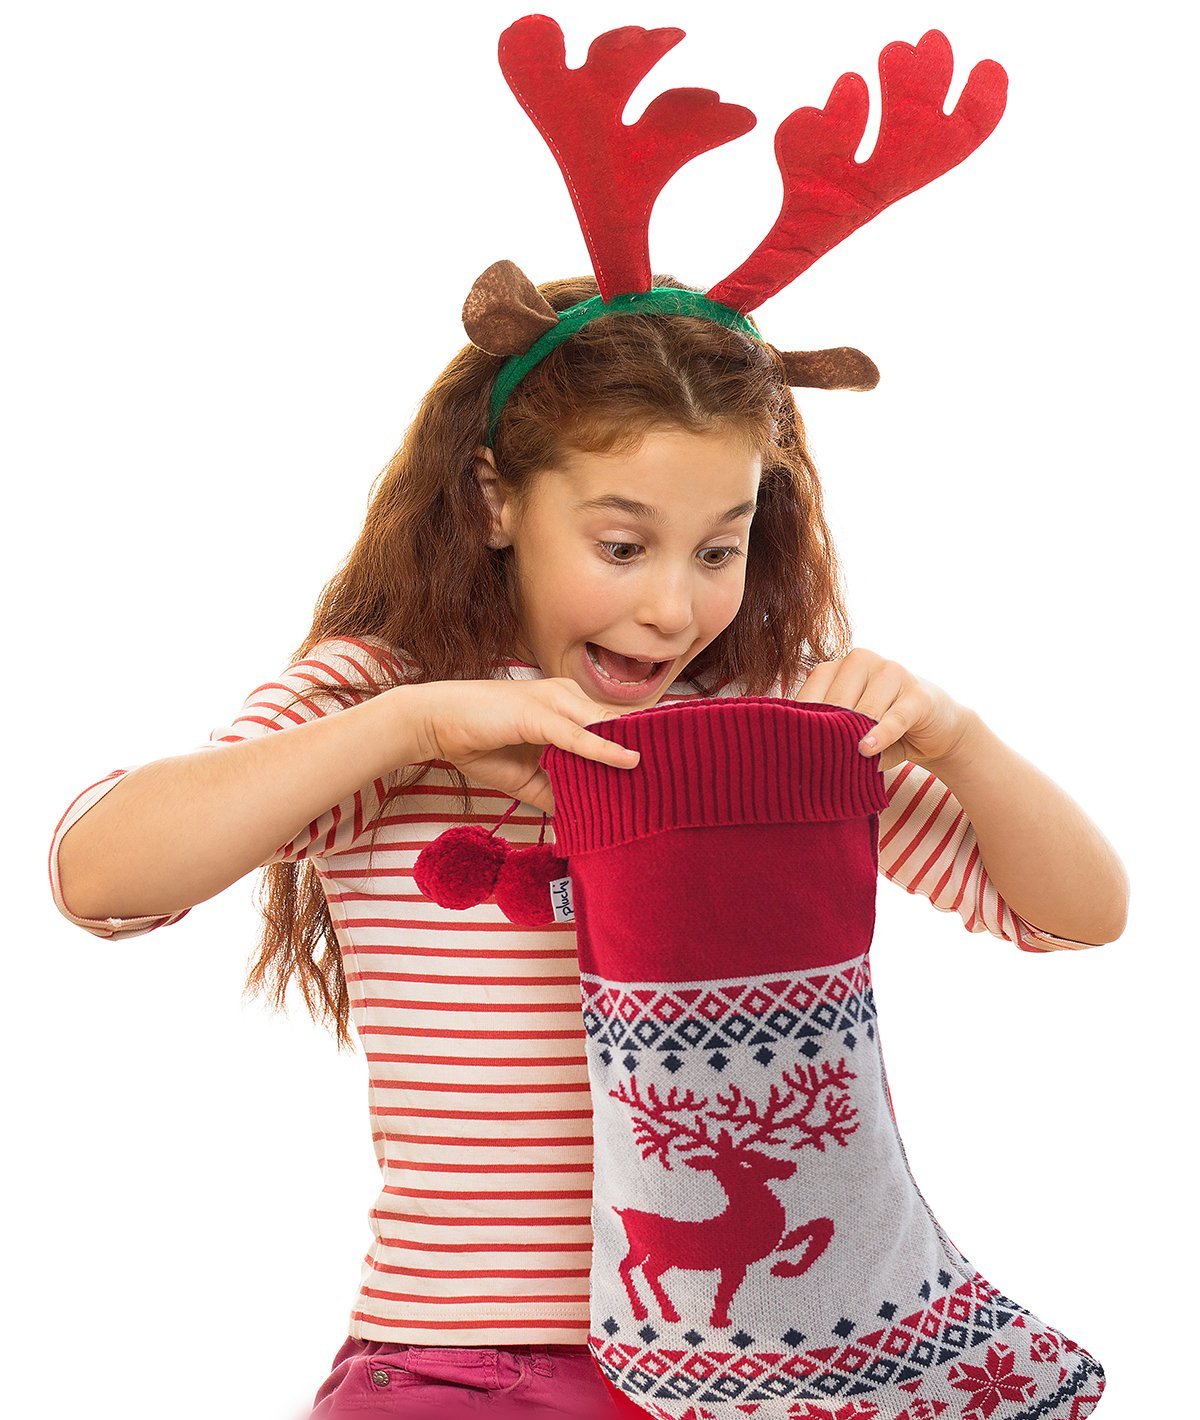 Santa's Reindeer - Red & Natural Cotton Knitted Christmas Decorative Stocking